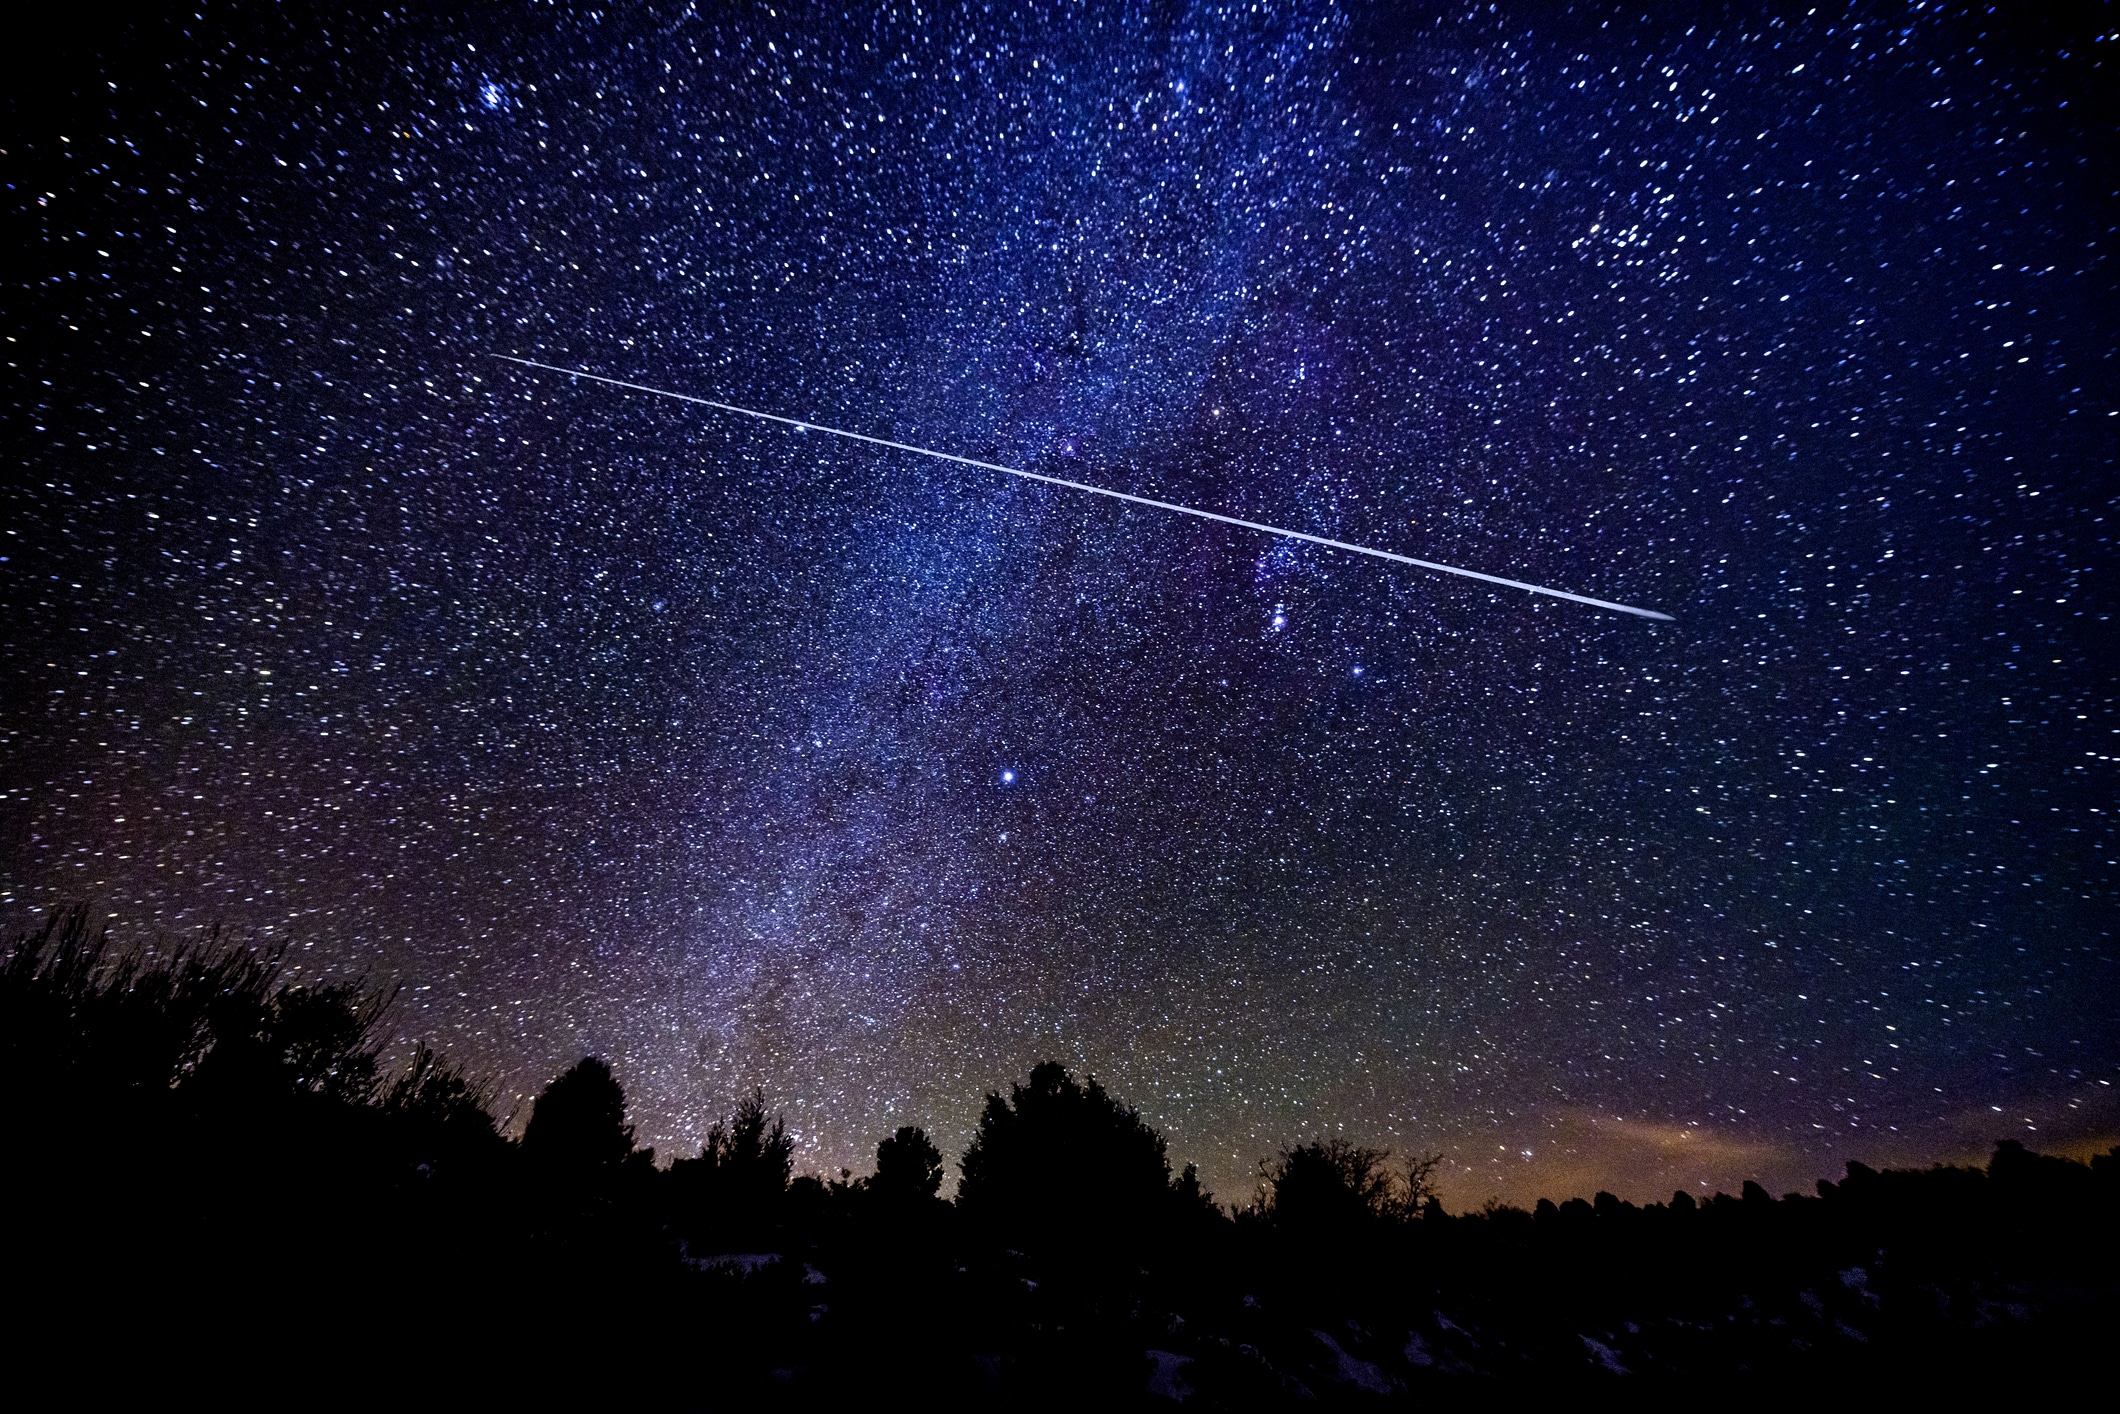 Meteor shower over a heavily treed forest